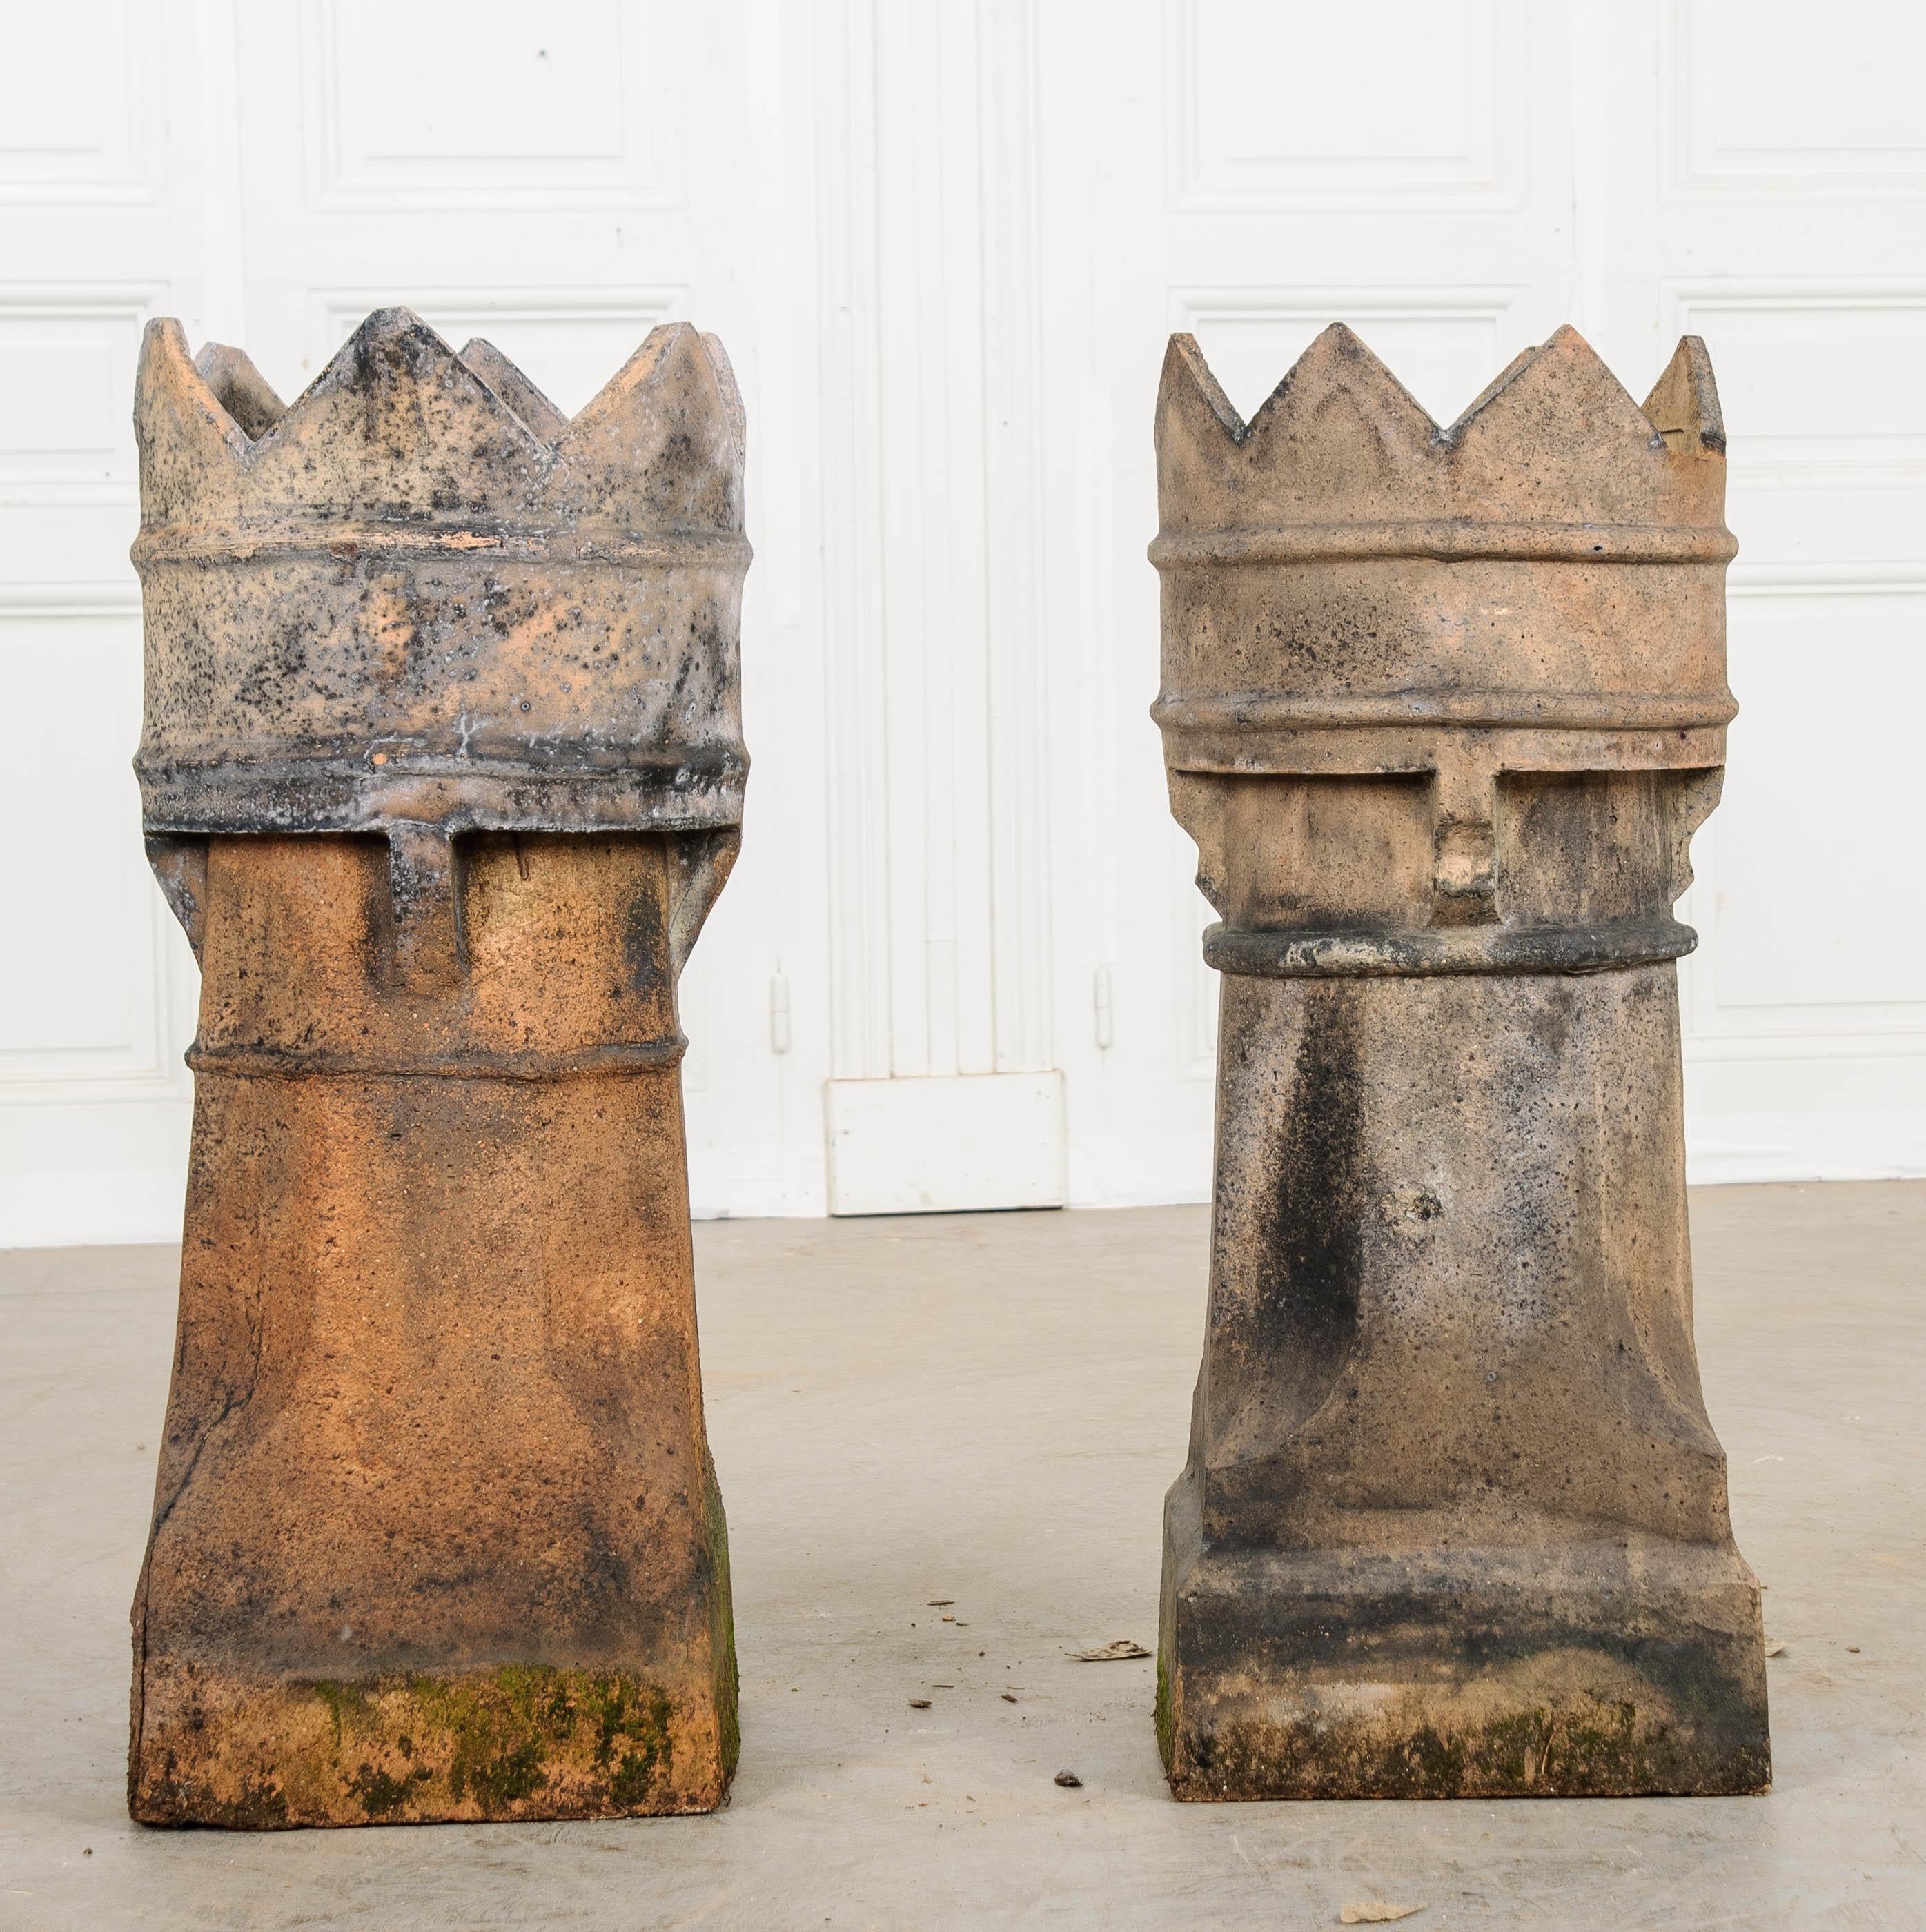 A remarkable pair of Victorian-era English terracotta chimney pots. These antique architectural elements serve as both decorative and functional additions to traditional chimney flues. During the 1800s, coal was used more and more to heat homes,